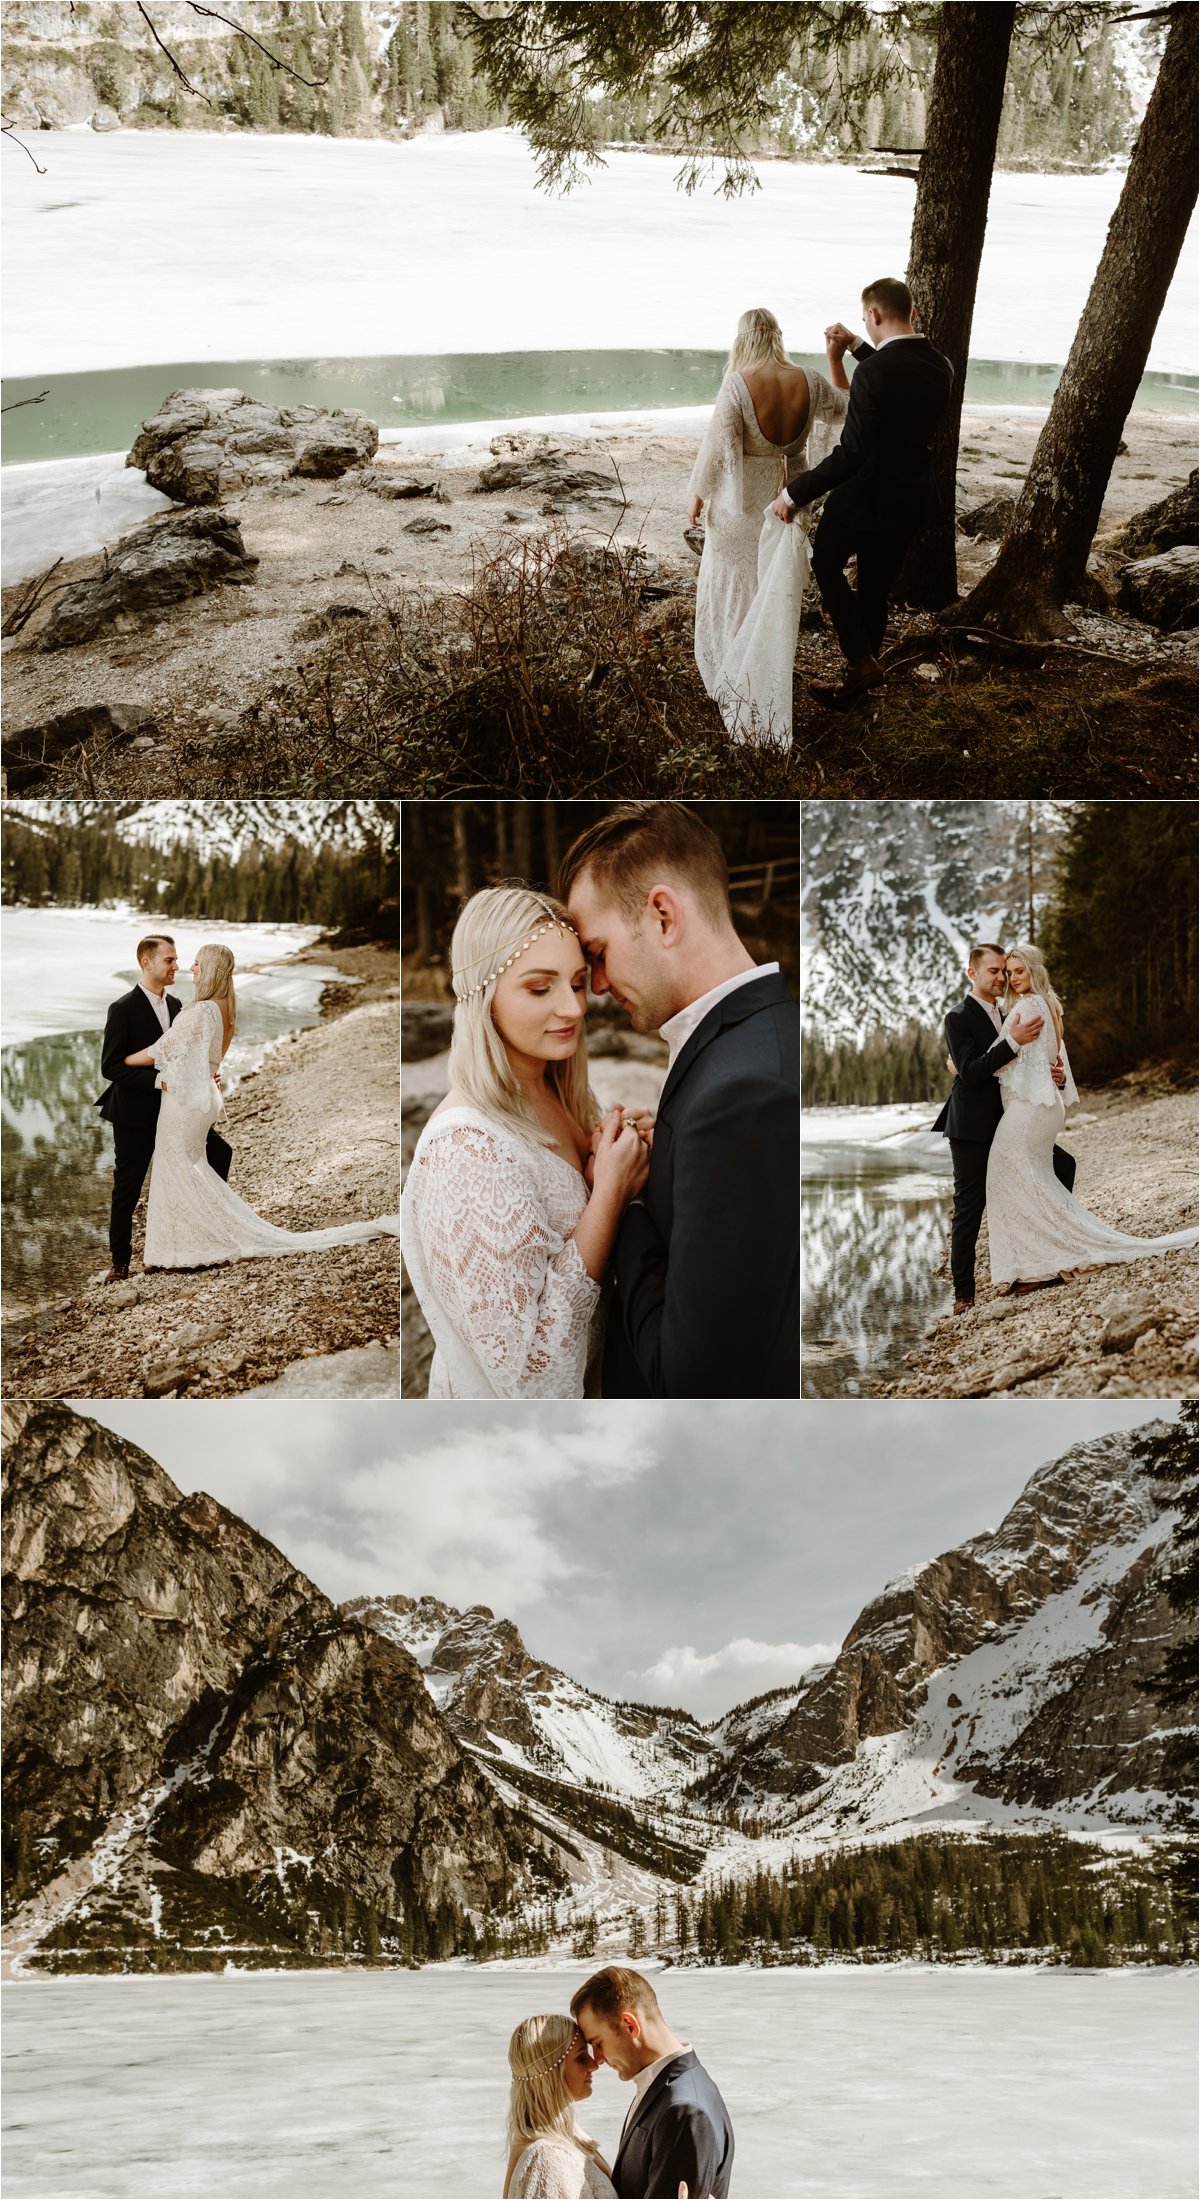 Erika & Nathan eloped at this stunning lake in the Italian Dolomites in Europe. Photos by Wild Connections Photography